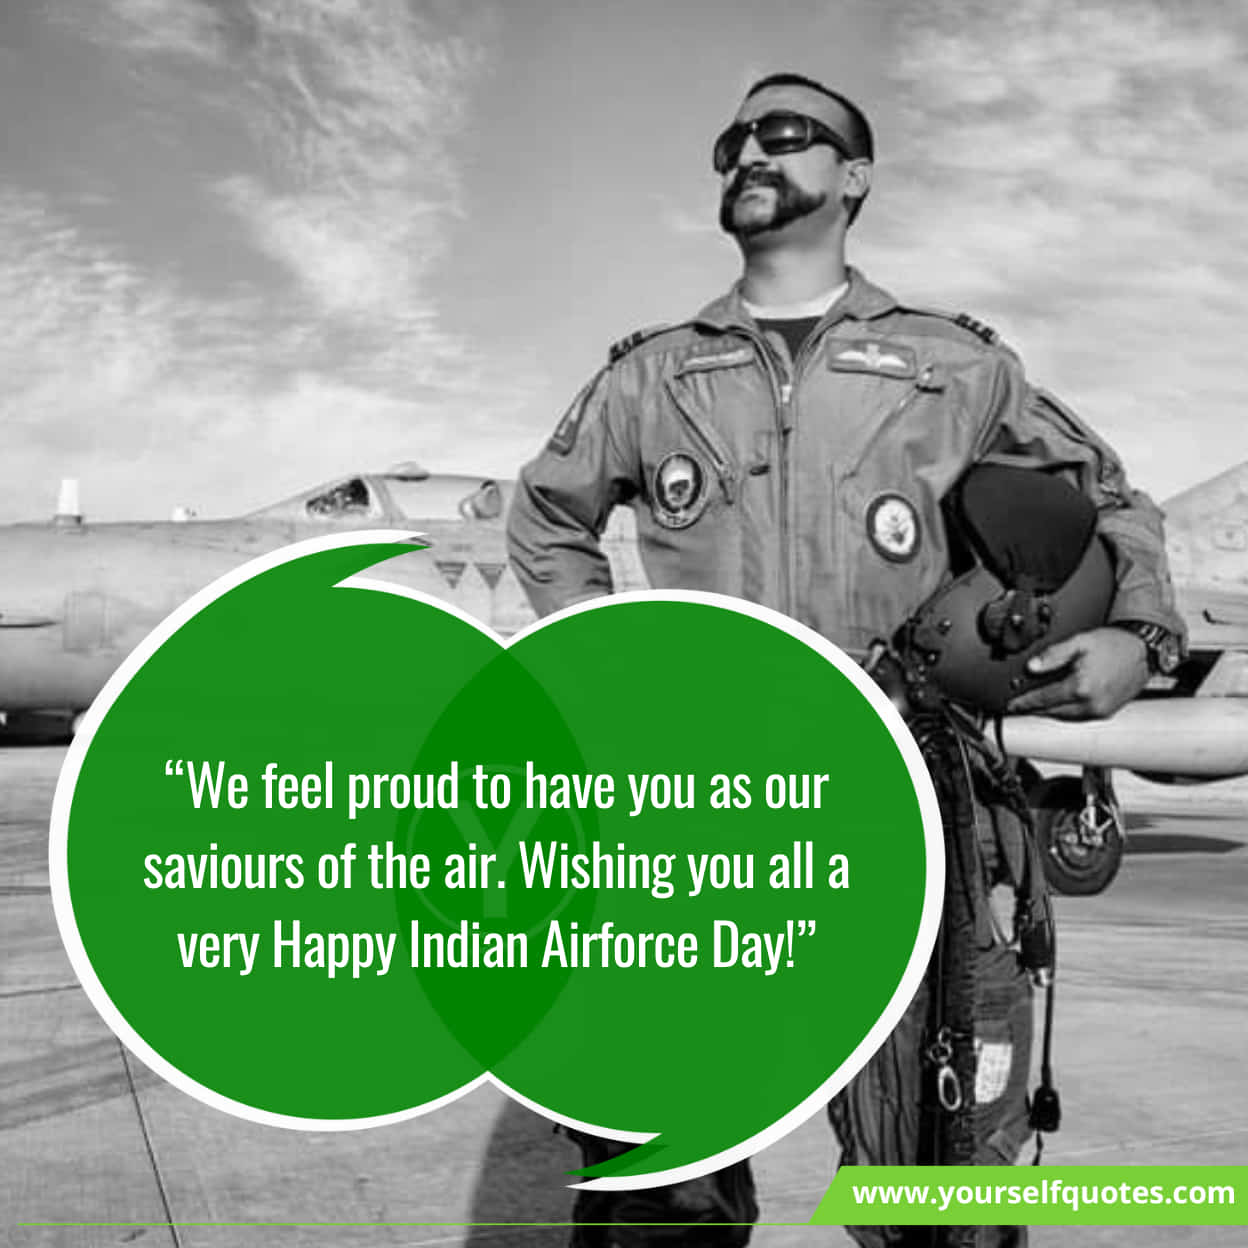 Indian Air Force Day Inspiring Quotes